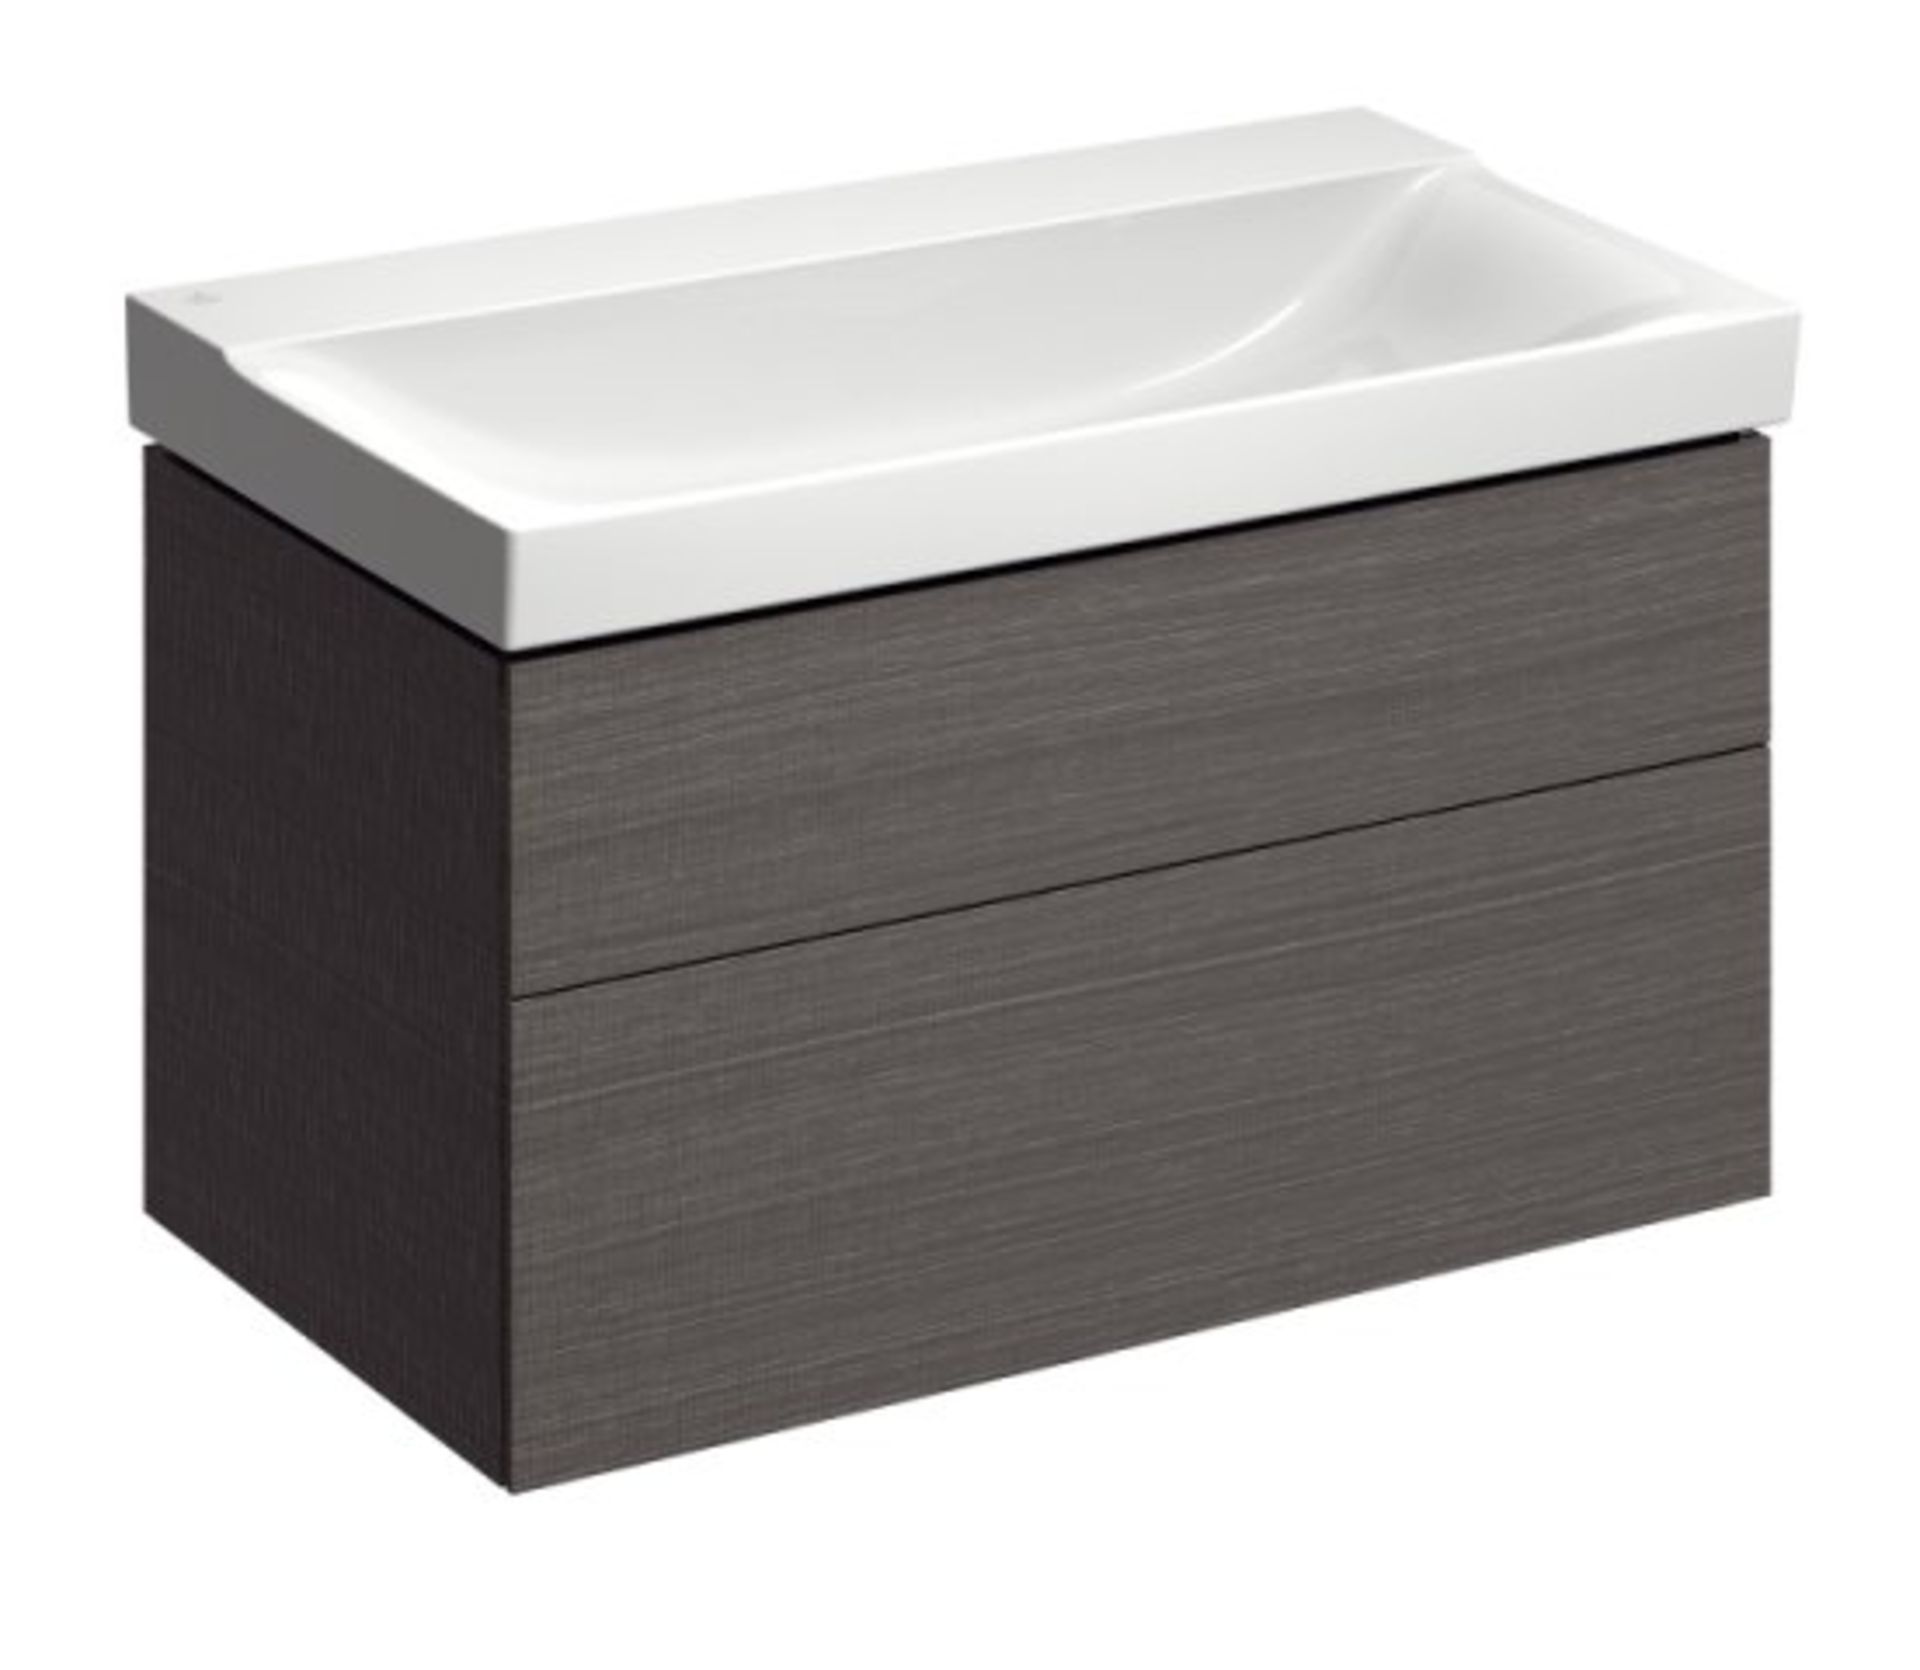 (PC3) Keramag 880mm Xeno Grey Vanity unit. RRP £1,518.52. Comes complete with basin. A premium...( - Image 3 of 3